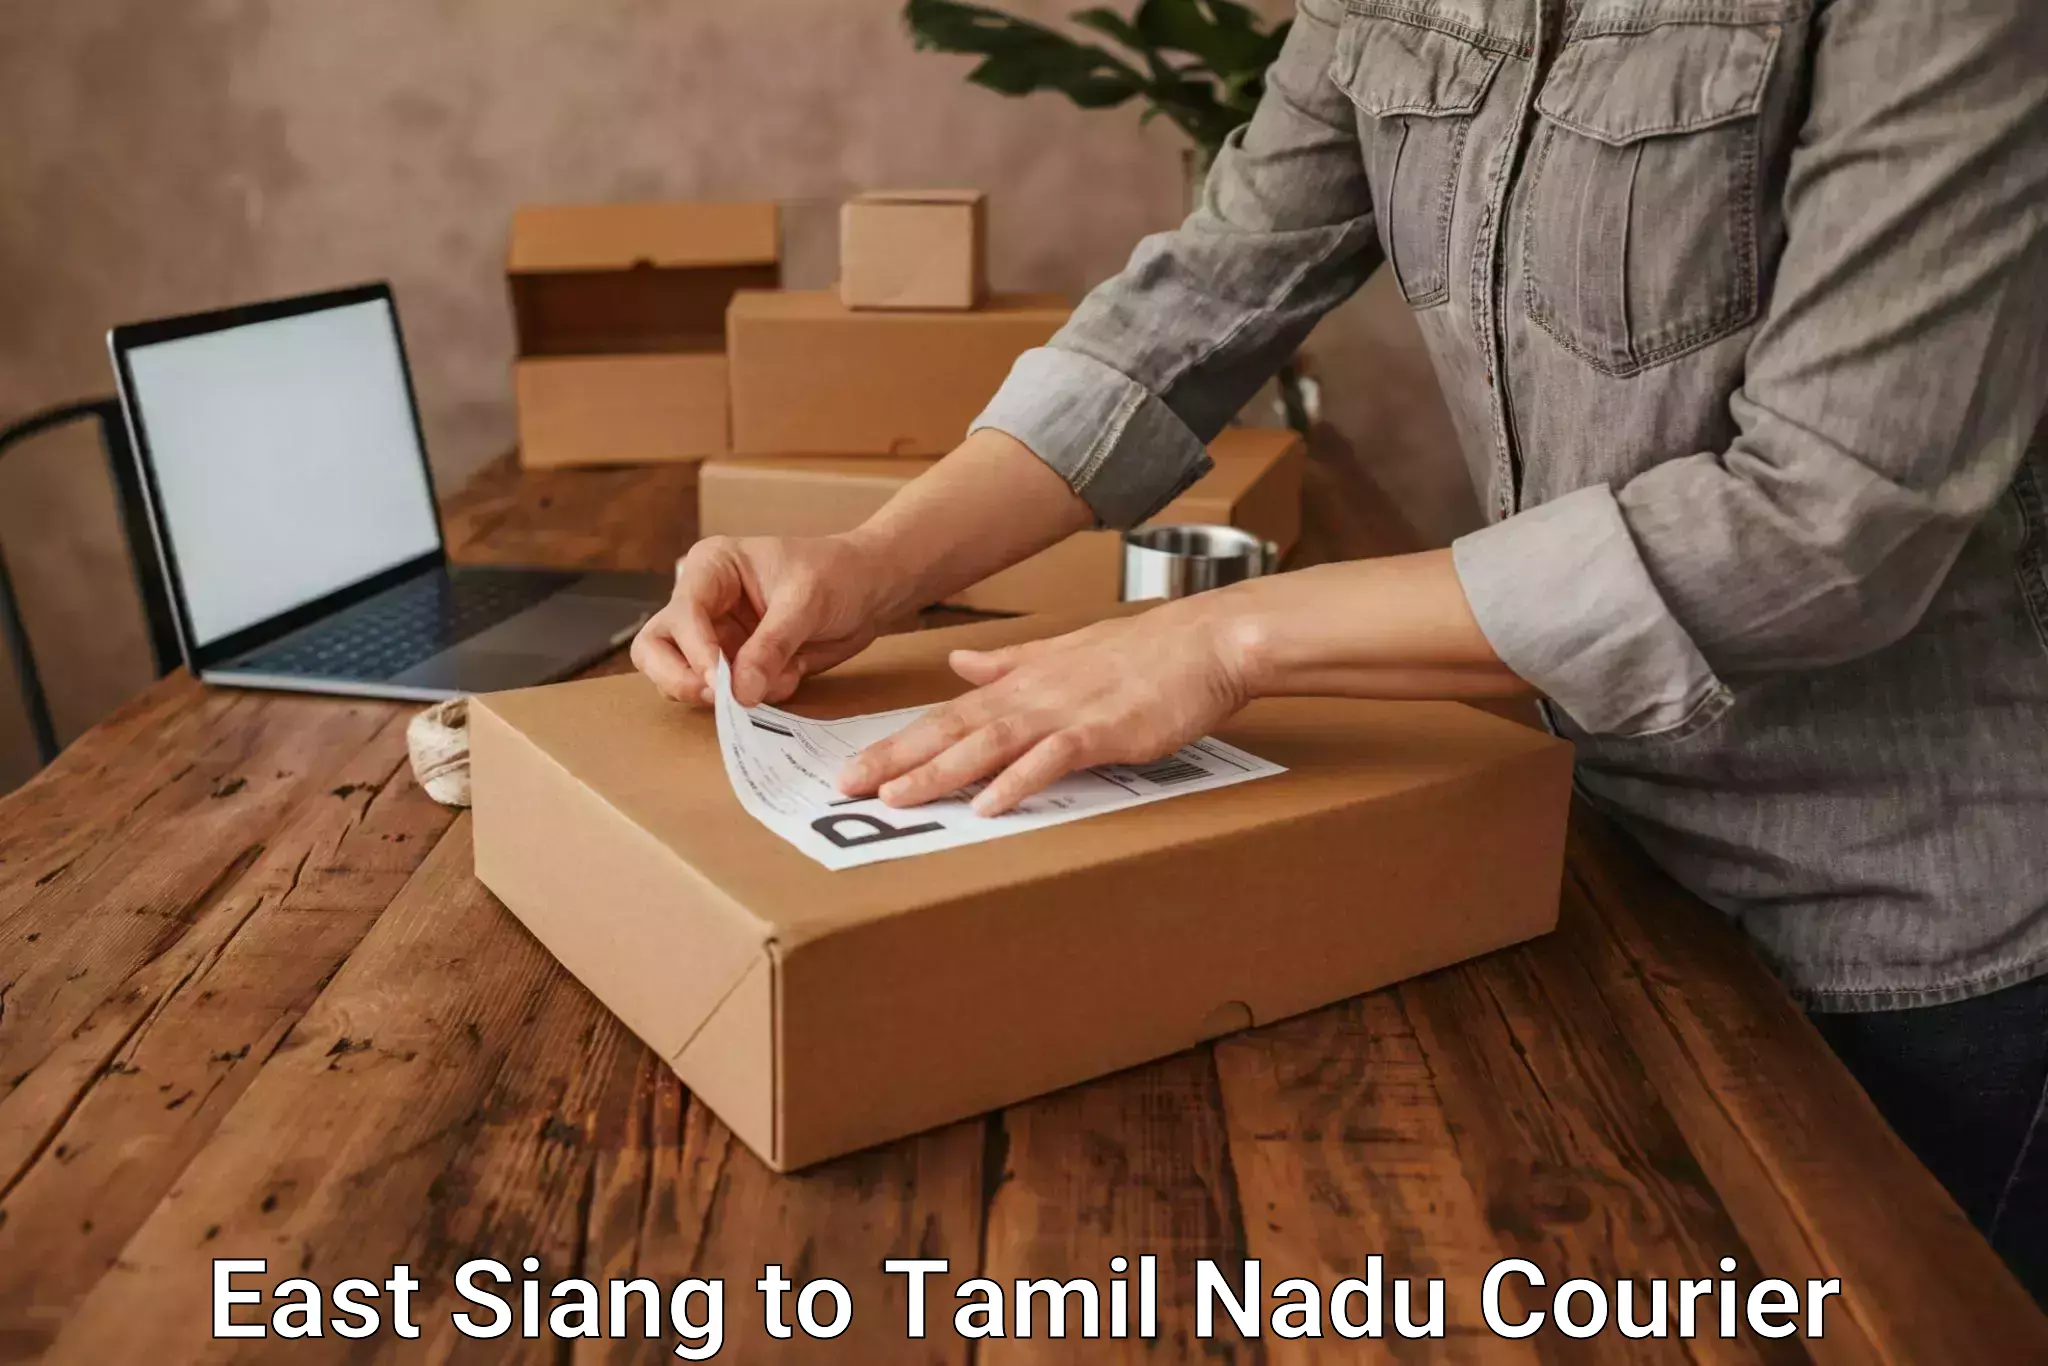 Large package courier in East Siang to Chennai Port